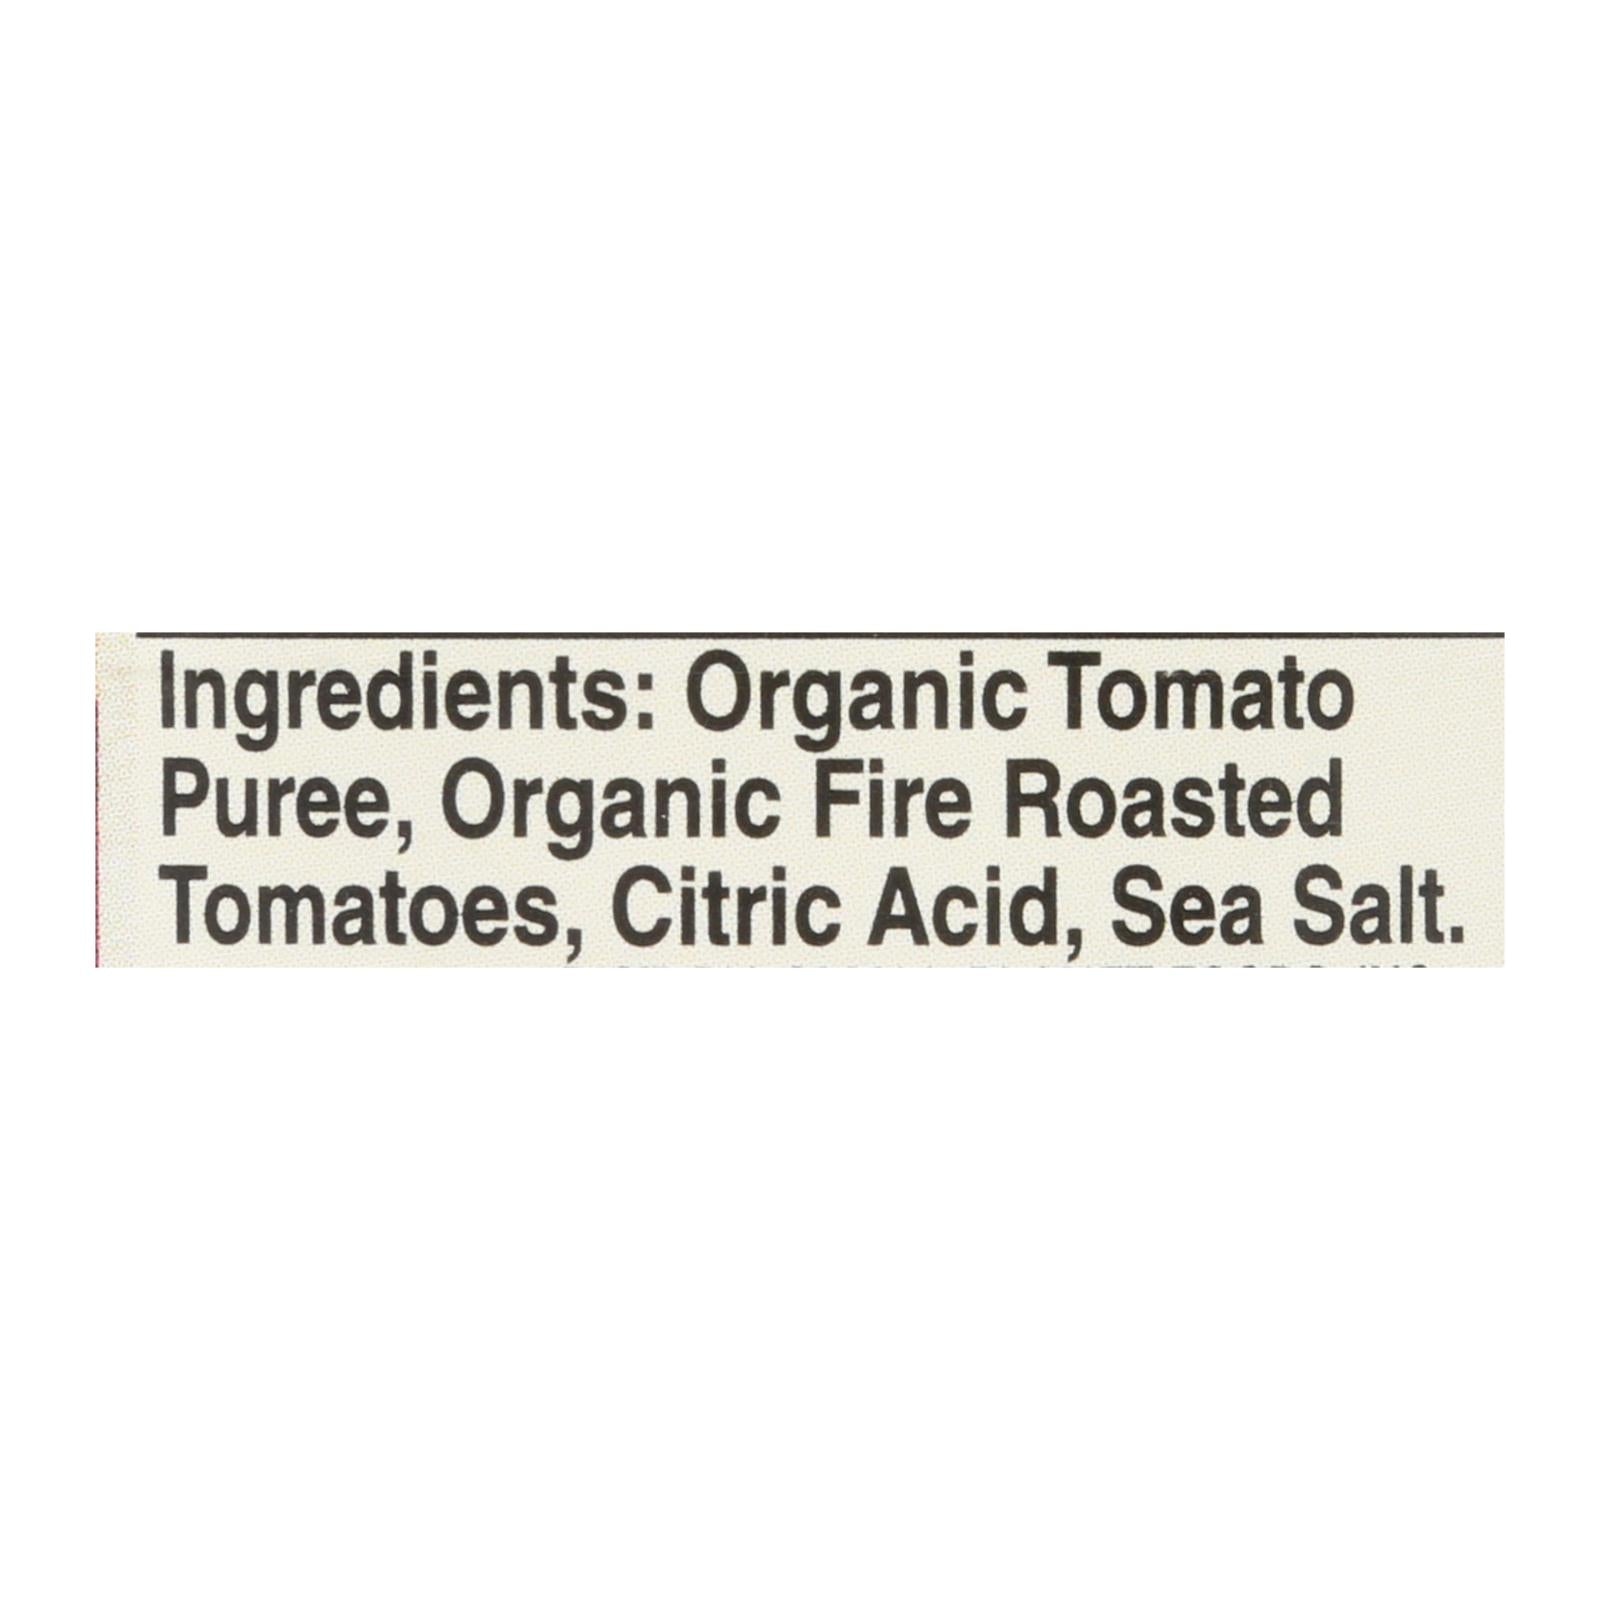 Muir Glen Fire Roasted Crushed Tomatoes - Tomato - Case Of 12 - 14.5 Oz.